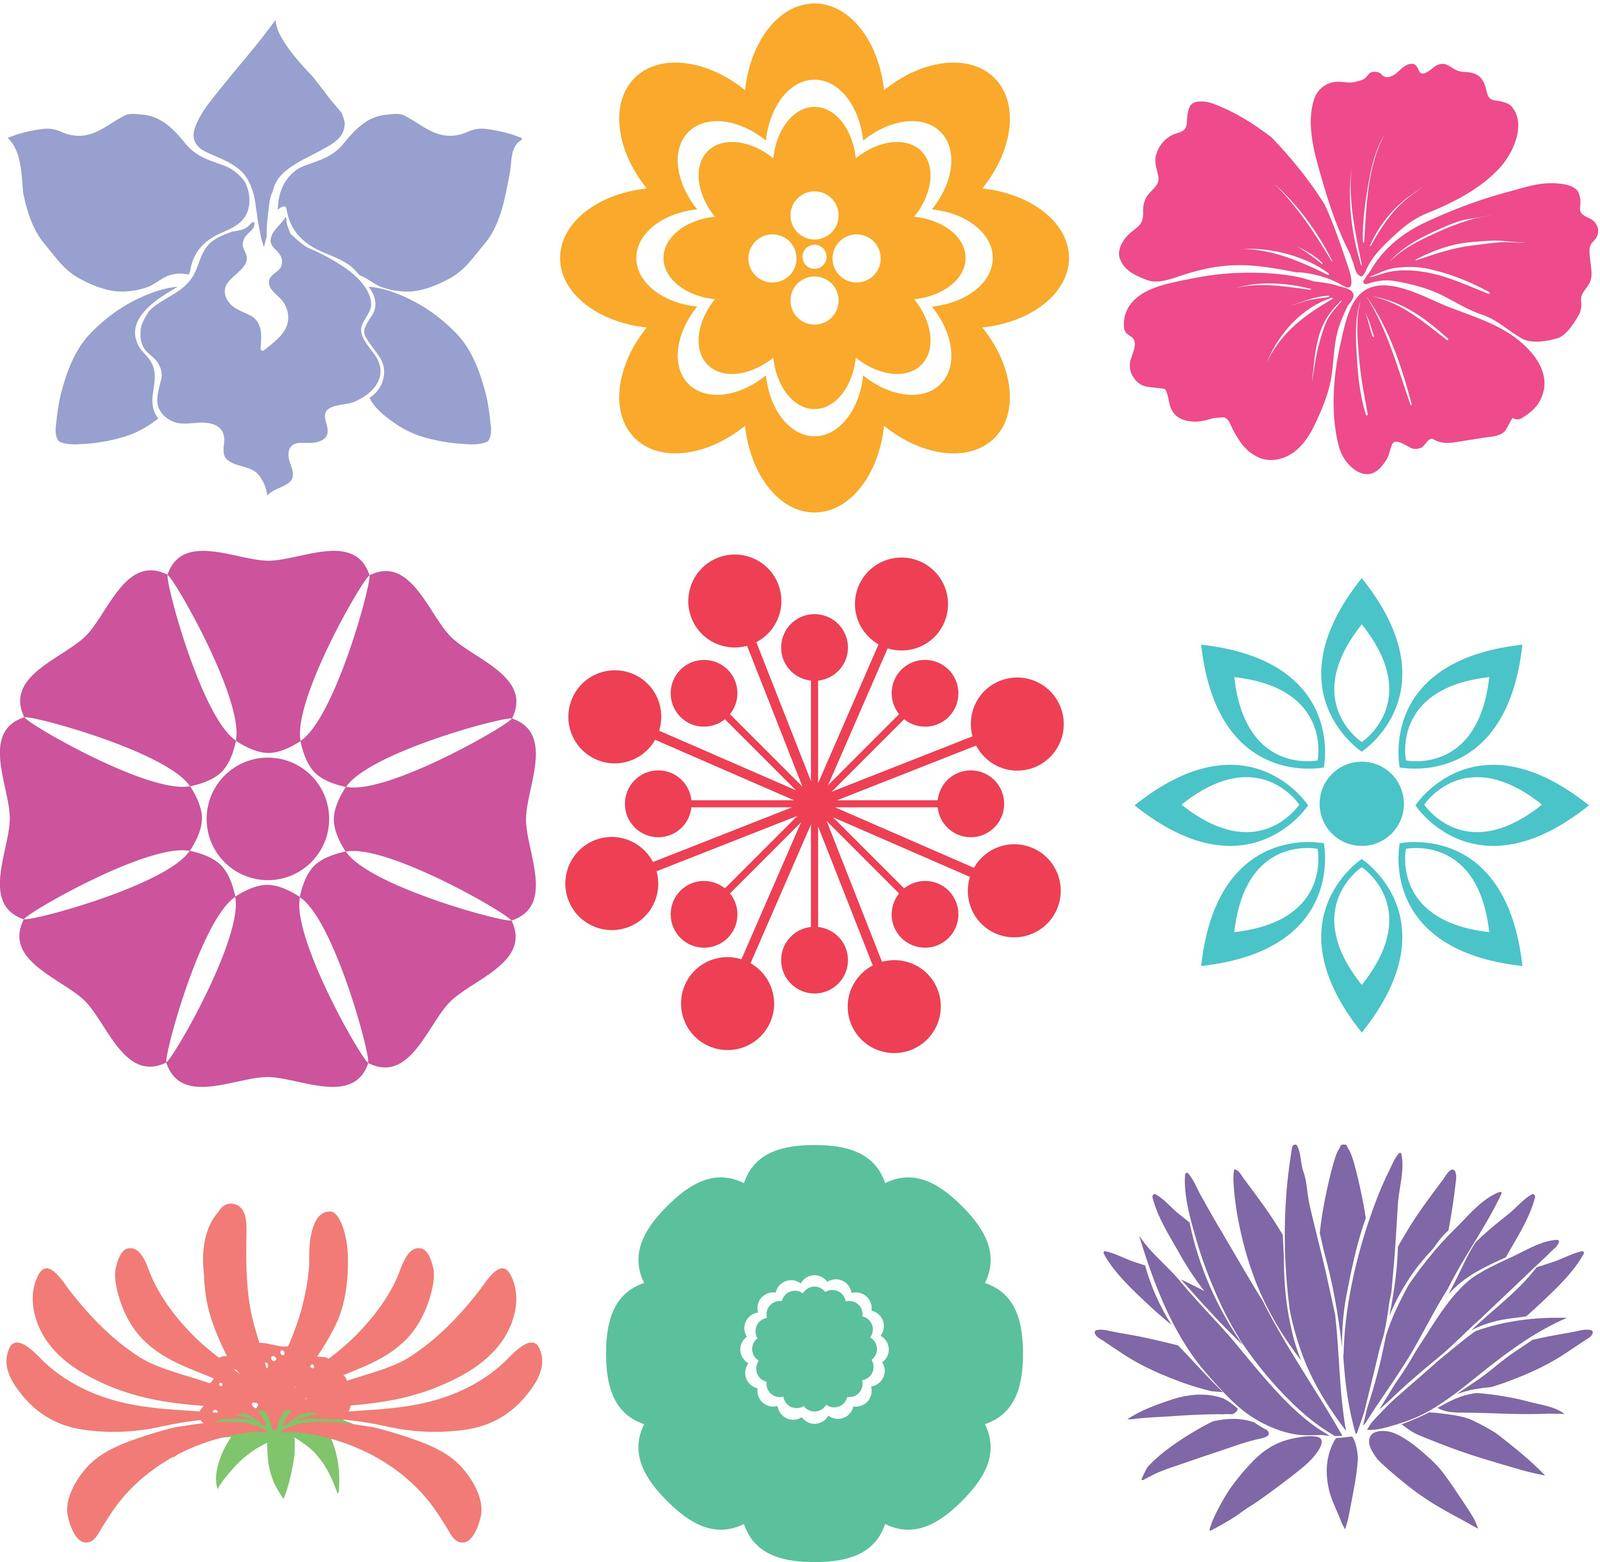 Floral templates by iimages